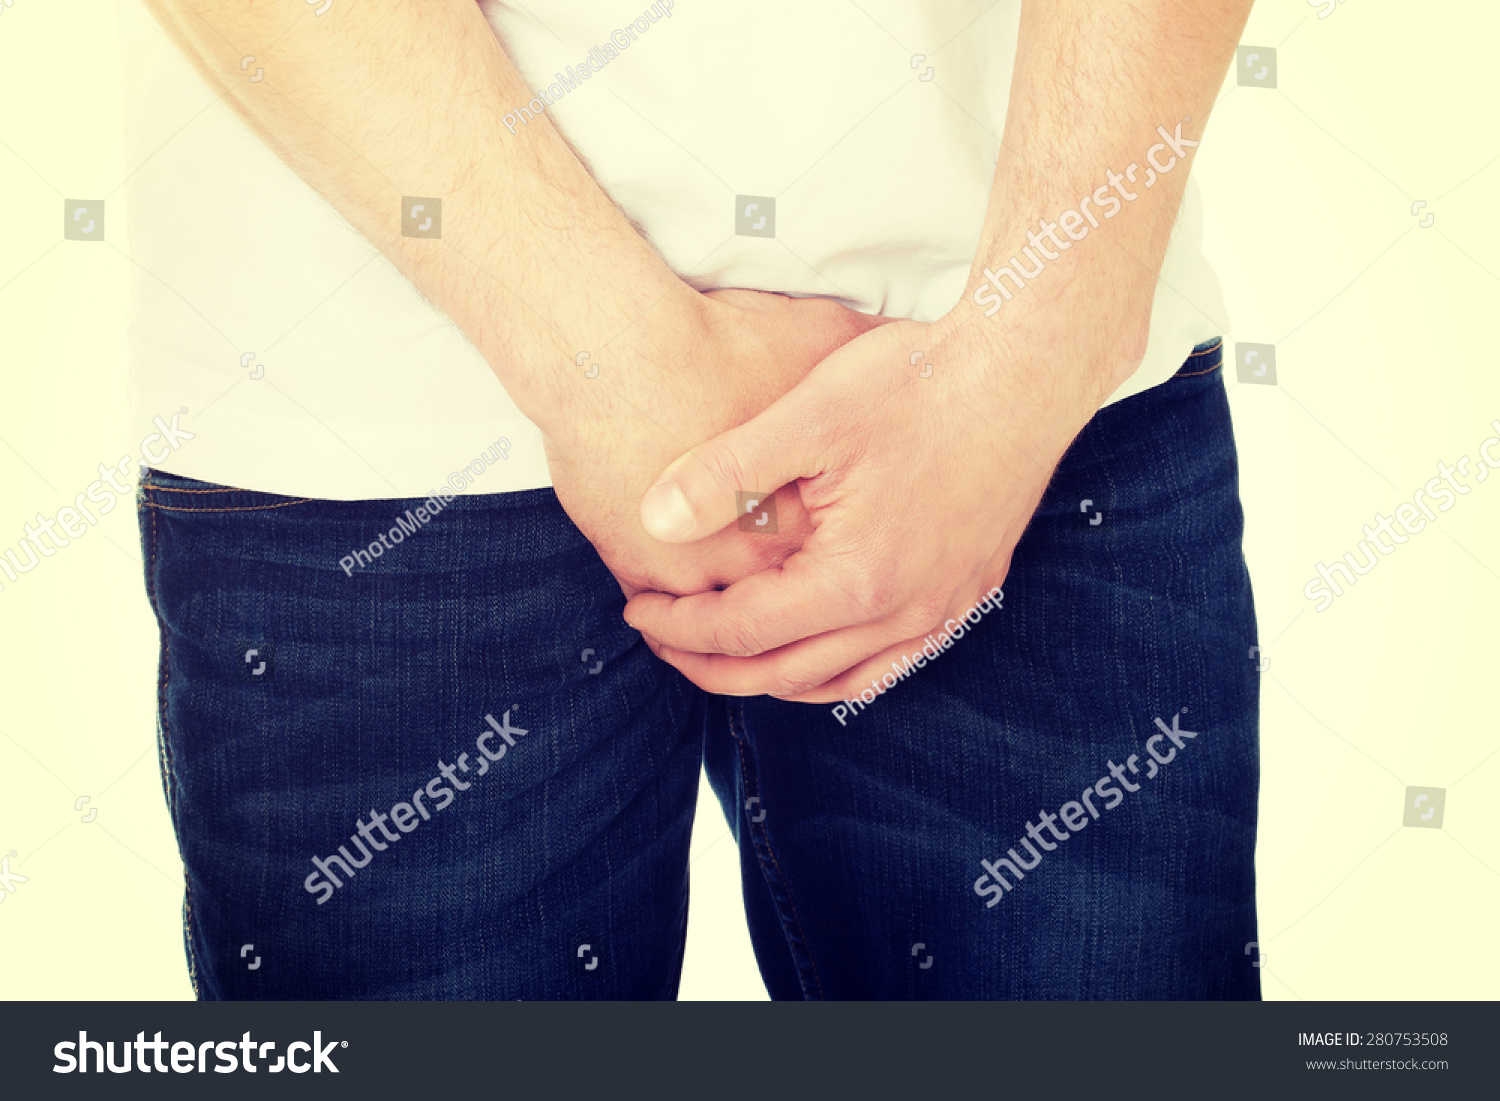 Shy Man Covering His Crotch Royalty Free Stock Photo